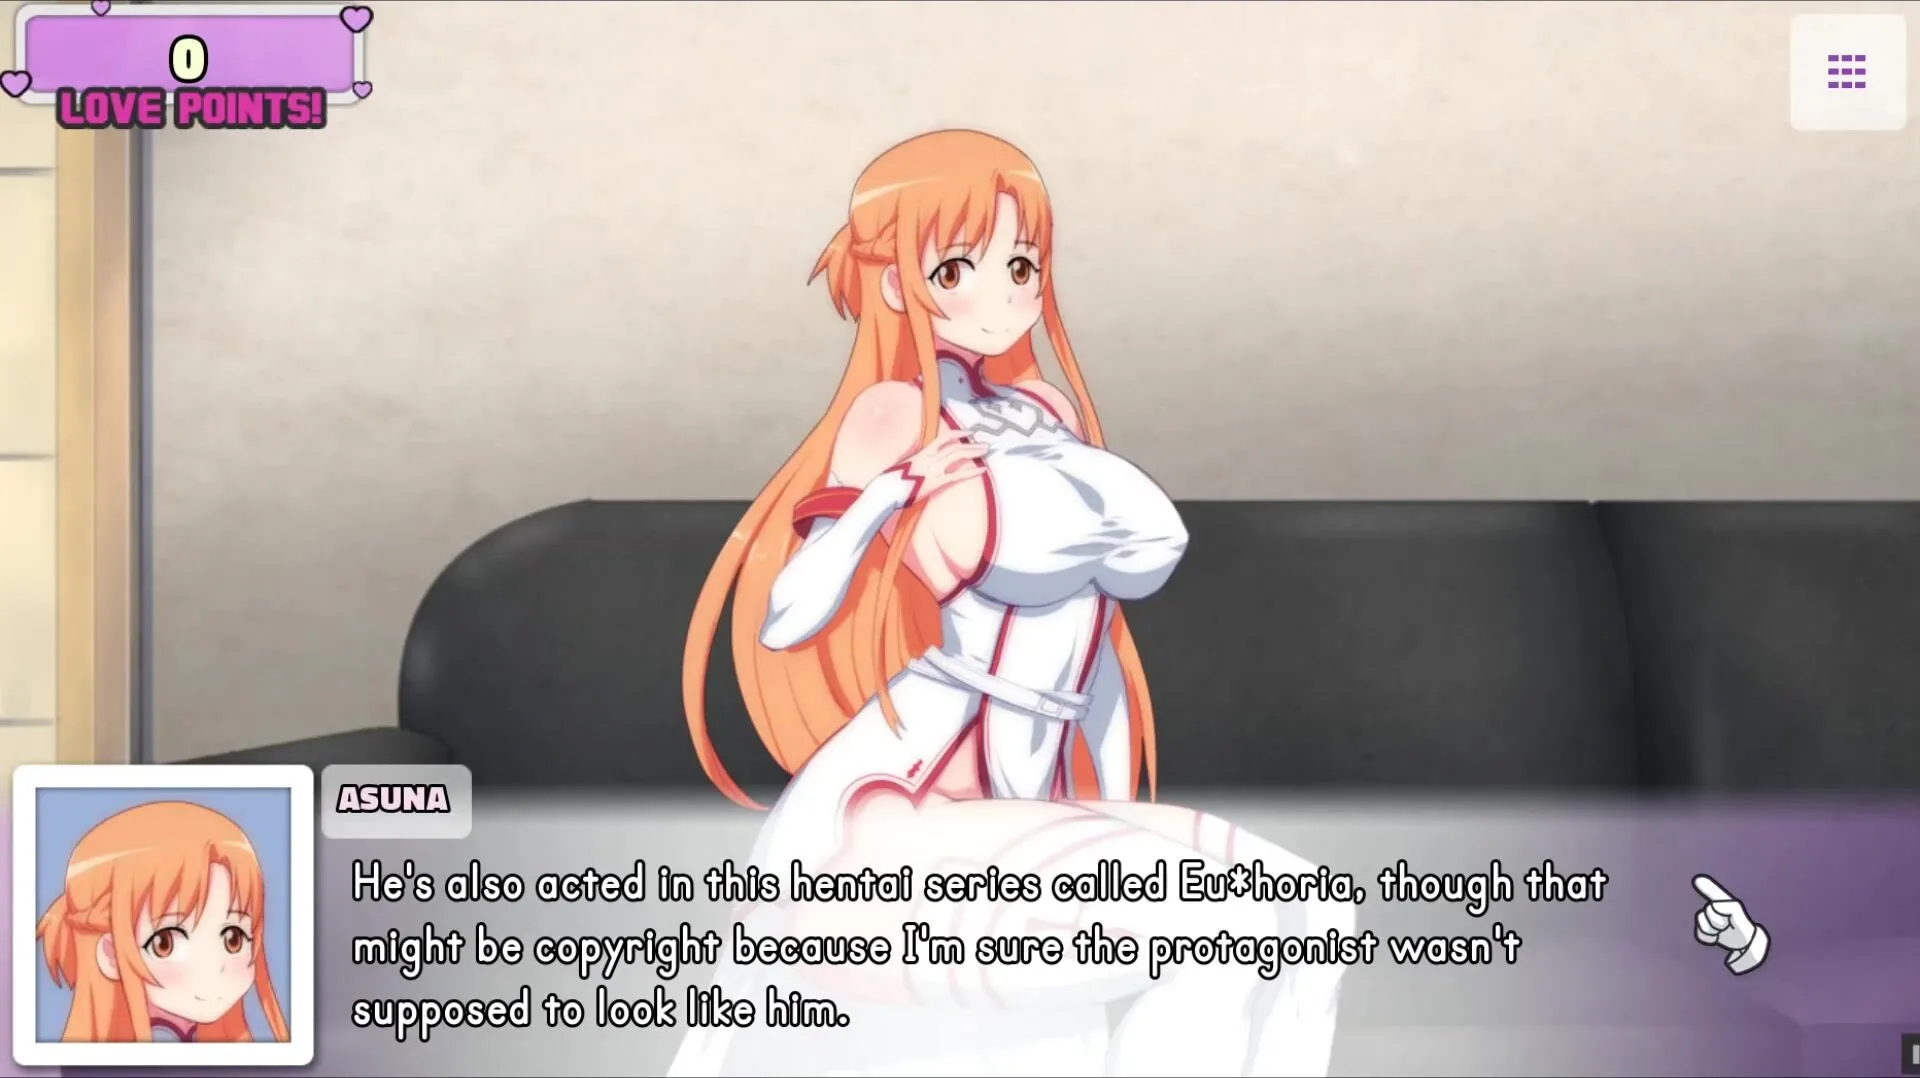 1920px x 1078px - Waifu Hub [rule 34 sex games] Ep.1 Asuna Porn Couch casting - she is not so